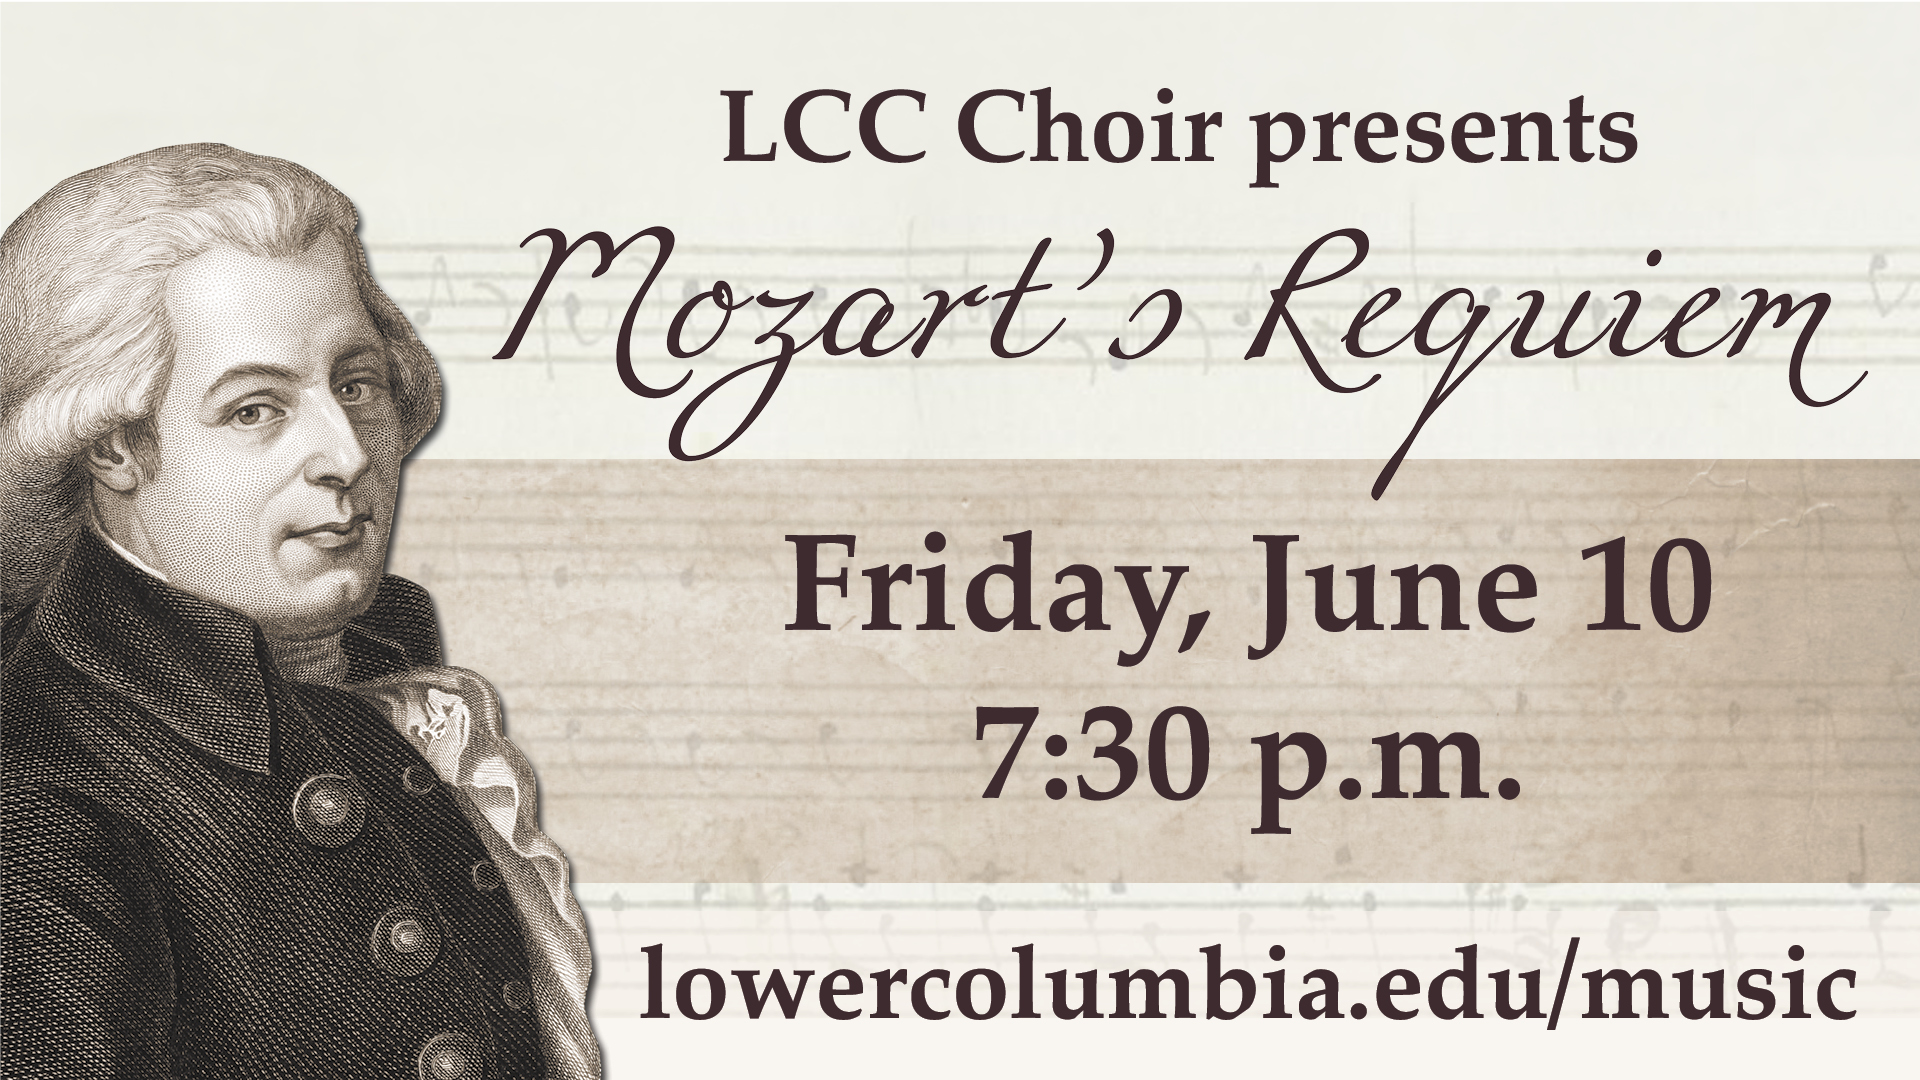 Earth tone poster with picture of mozart for LCC choir , mozart requiem June 10, at 7:30pm